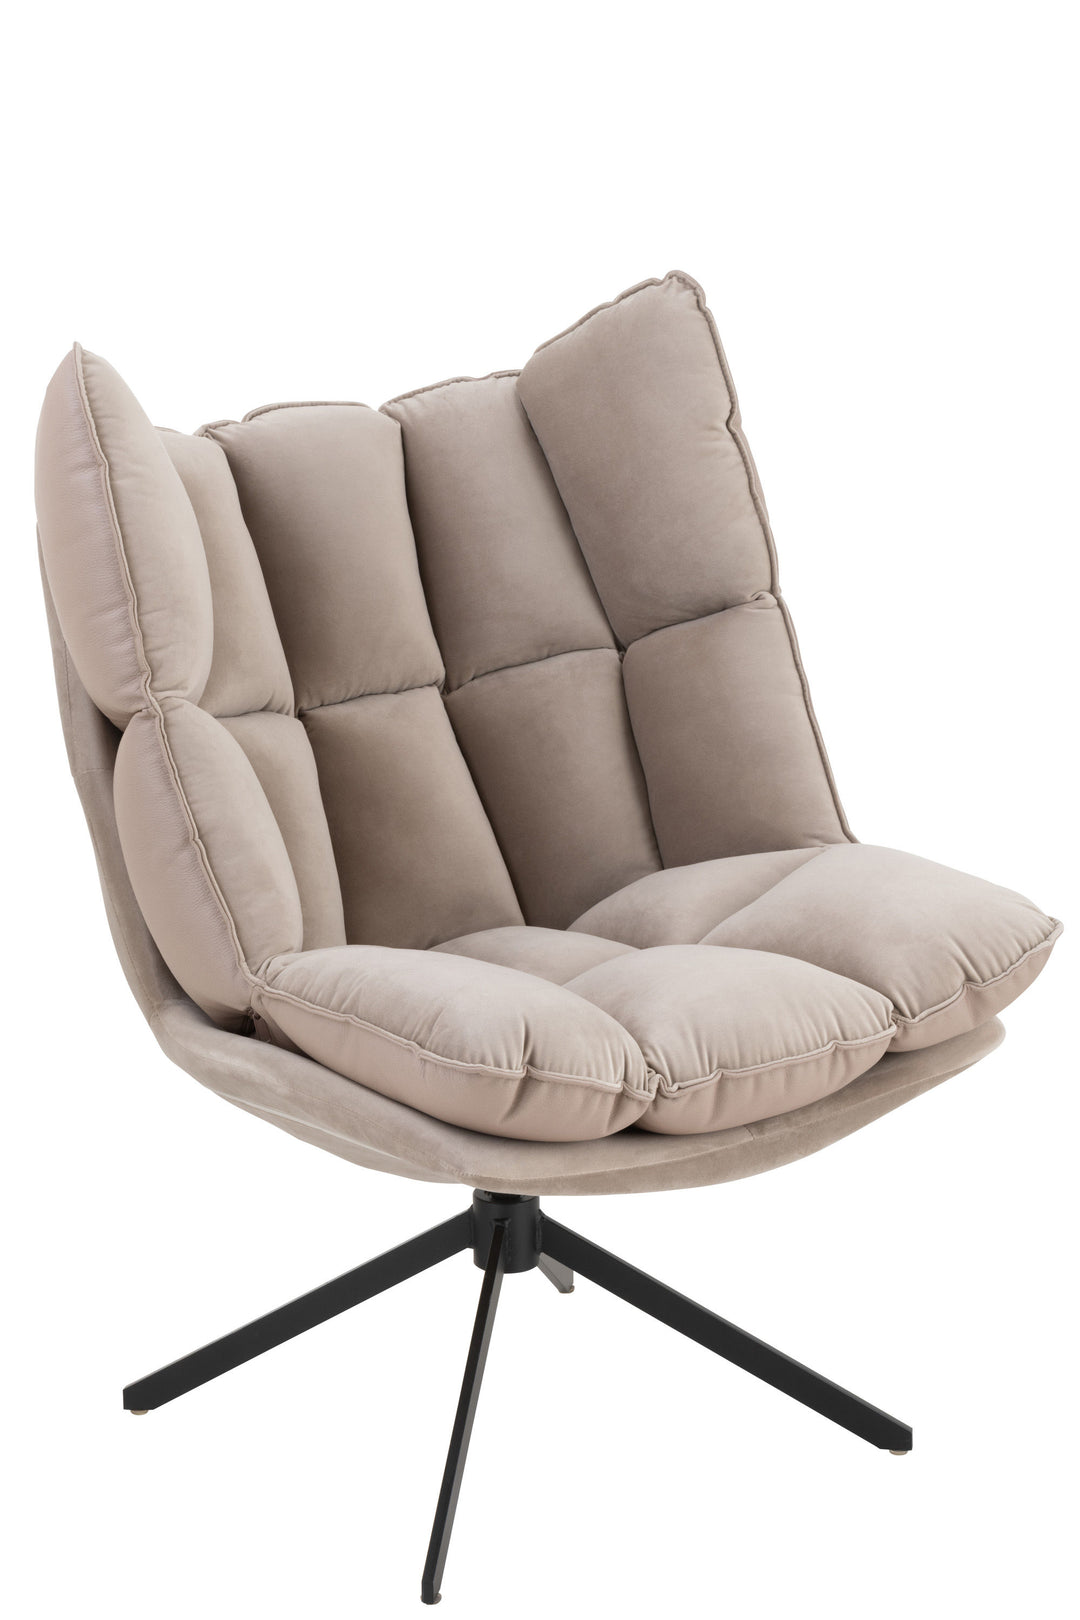 J-Line by Jolipa CHAIR RELAX CUSHION ON FRAME TEXTILE/METAL EXTRA LIGHT GREY